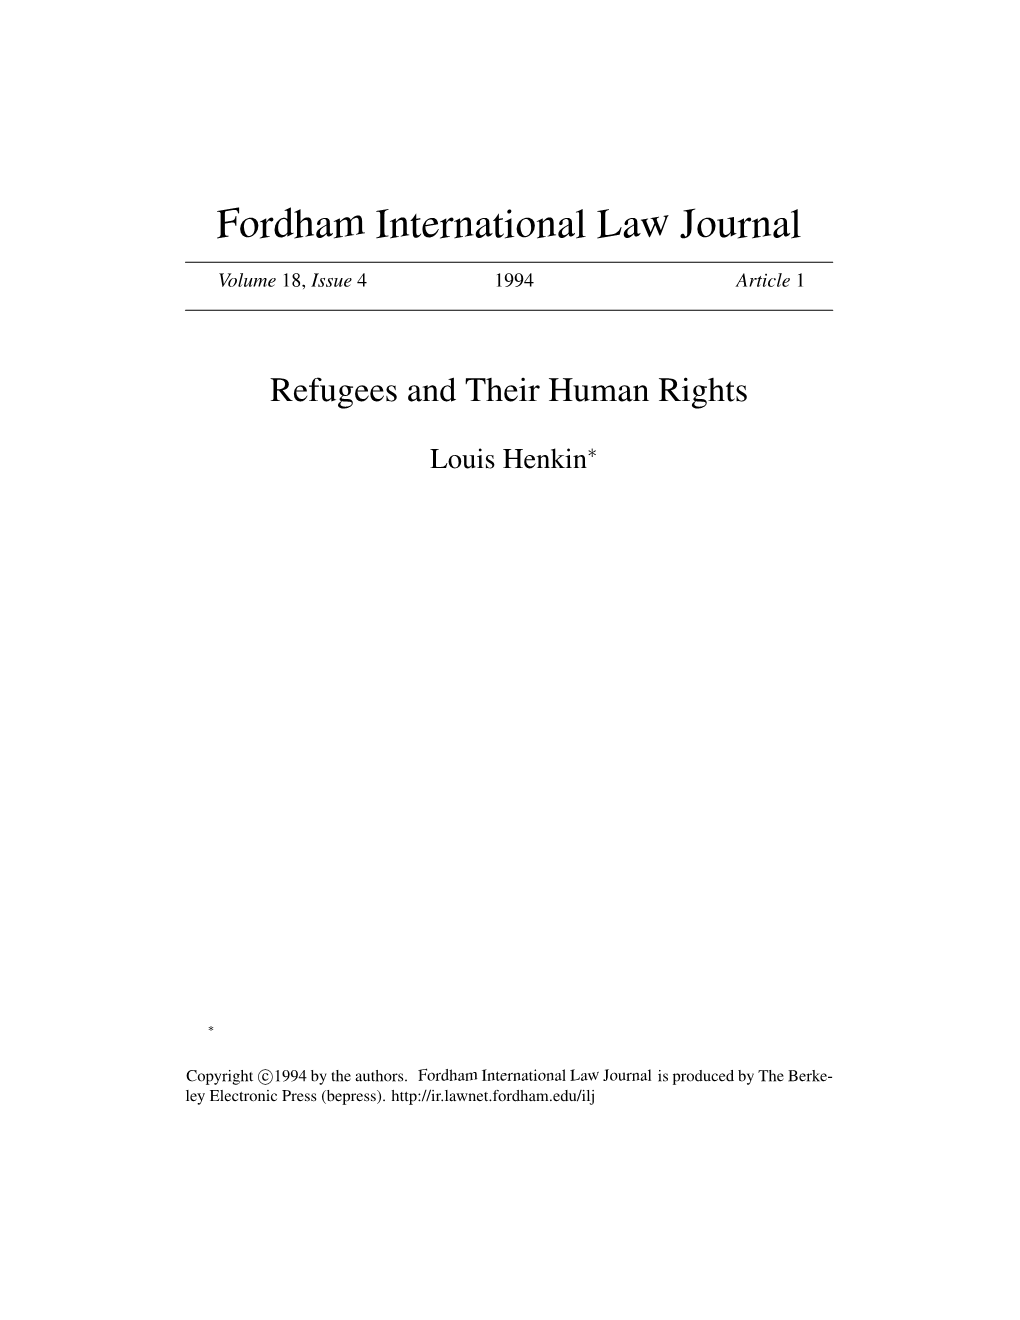 Refugees and Their Human Rights